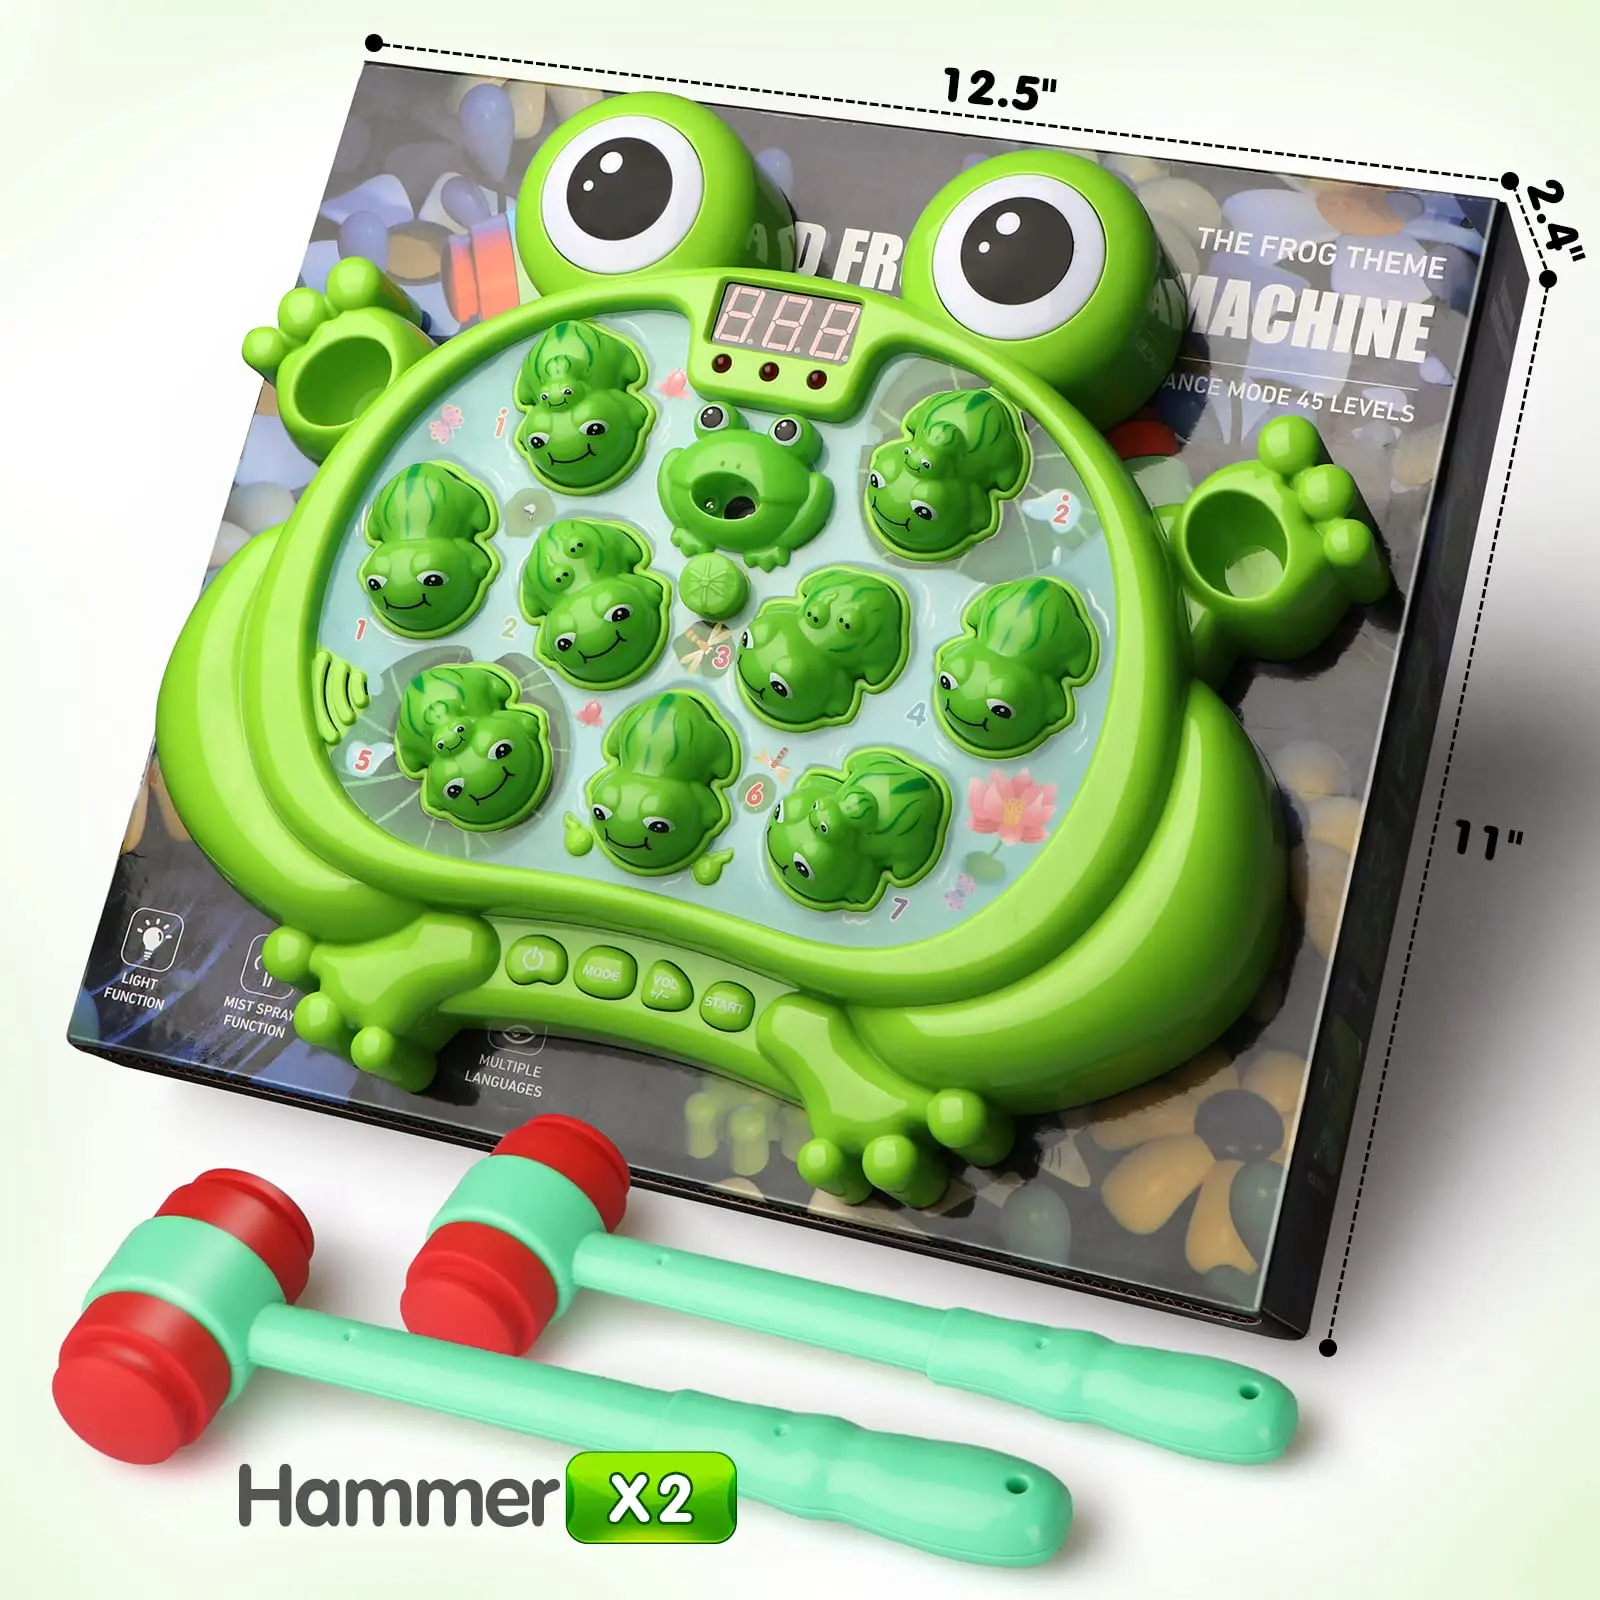 Interactive Whack A Frog Game For Kids Included Electronic Challenging Game Machine With 2 Hammers